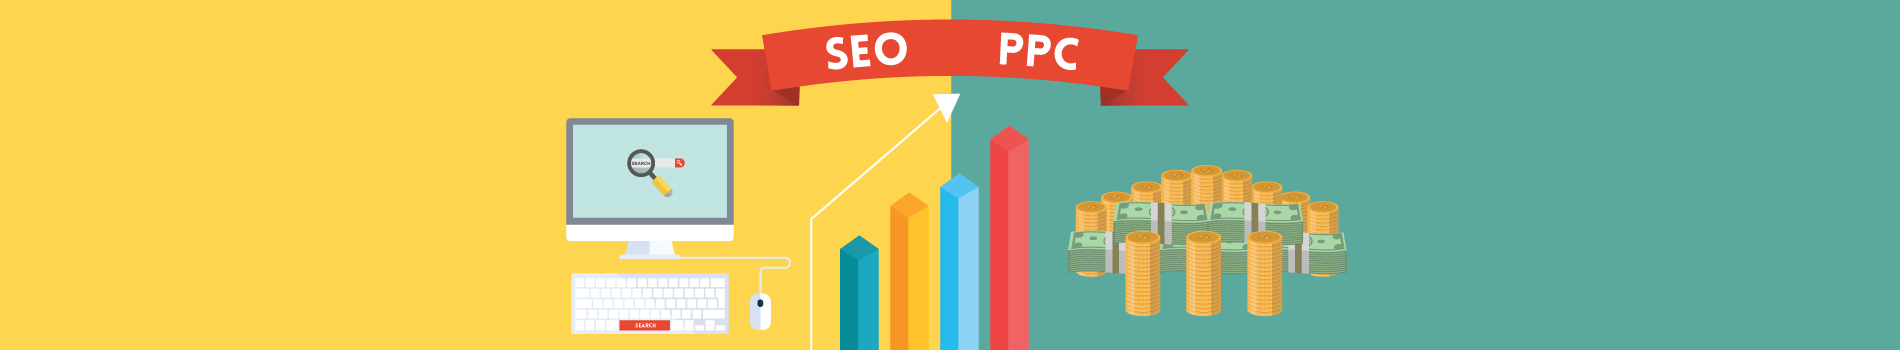 SEO vs PPC which has a better ROI